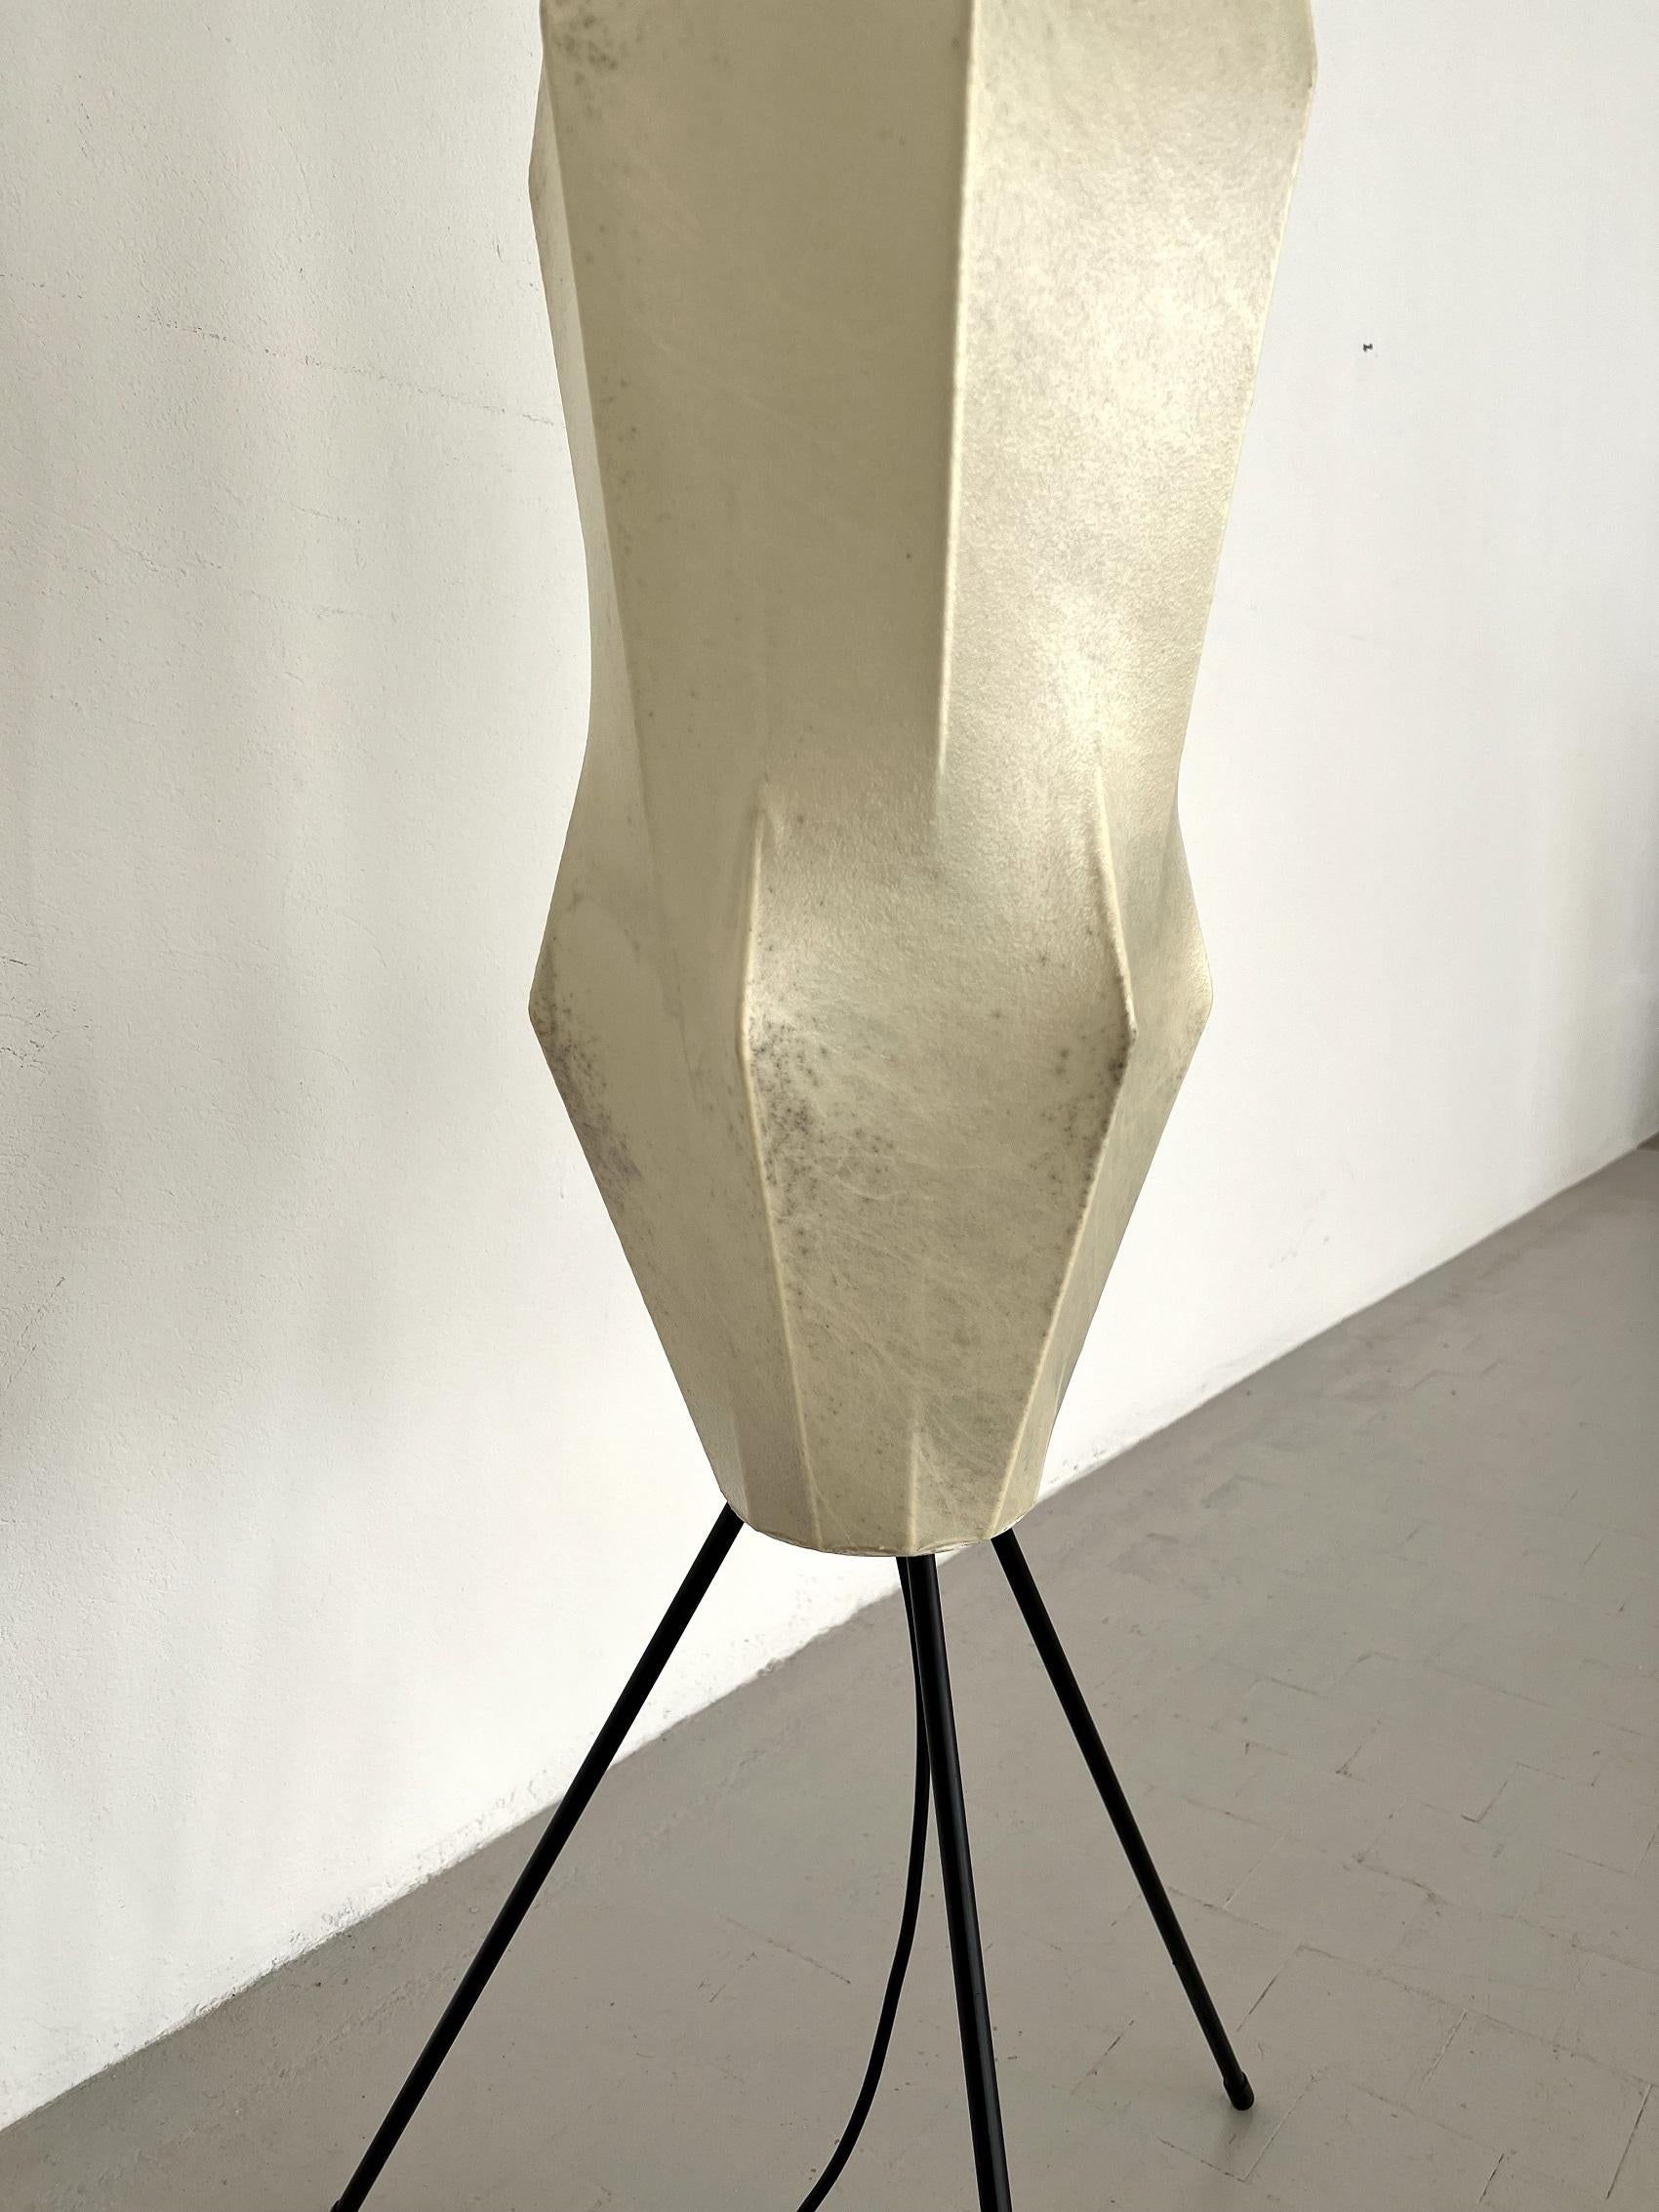 Hand-Crafted Midcentury Cocoon Floor Lamp with Metal Base by Goldkant, 1960s For Sale